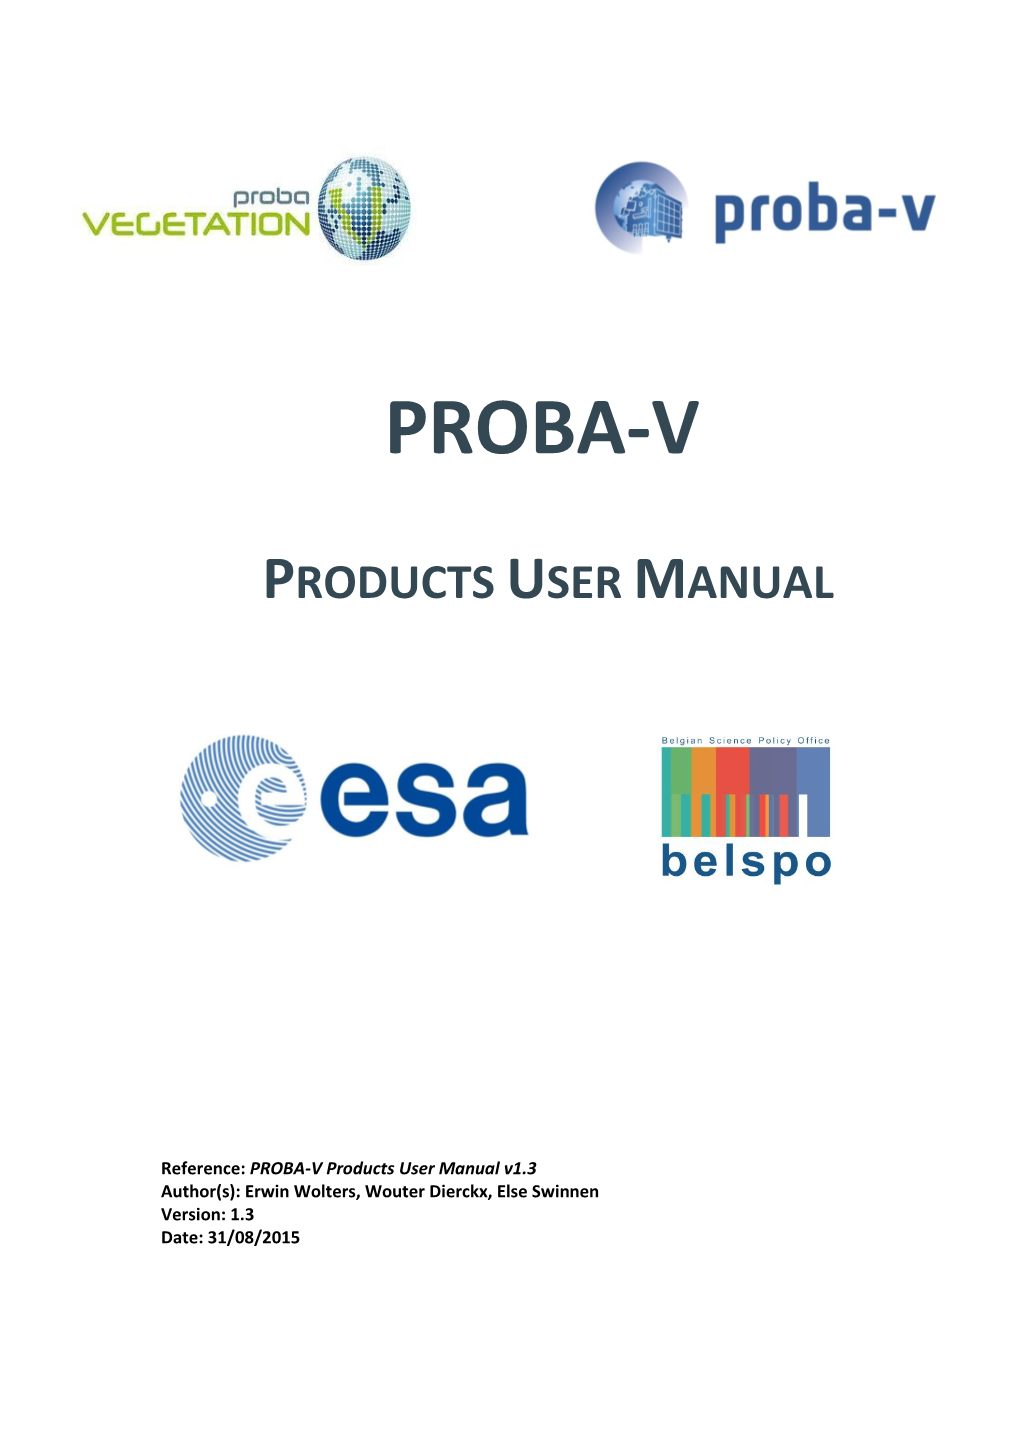 PROBA-V Products User Manual V1.3 Author(S): Erwin Wolters, Wouter Dierckx, Else Swinnen Version: 1.3 Date: 31/08/2015